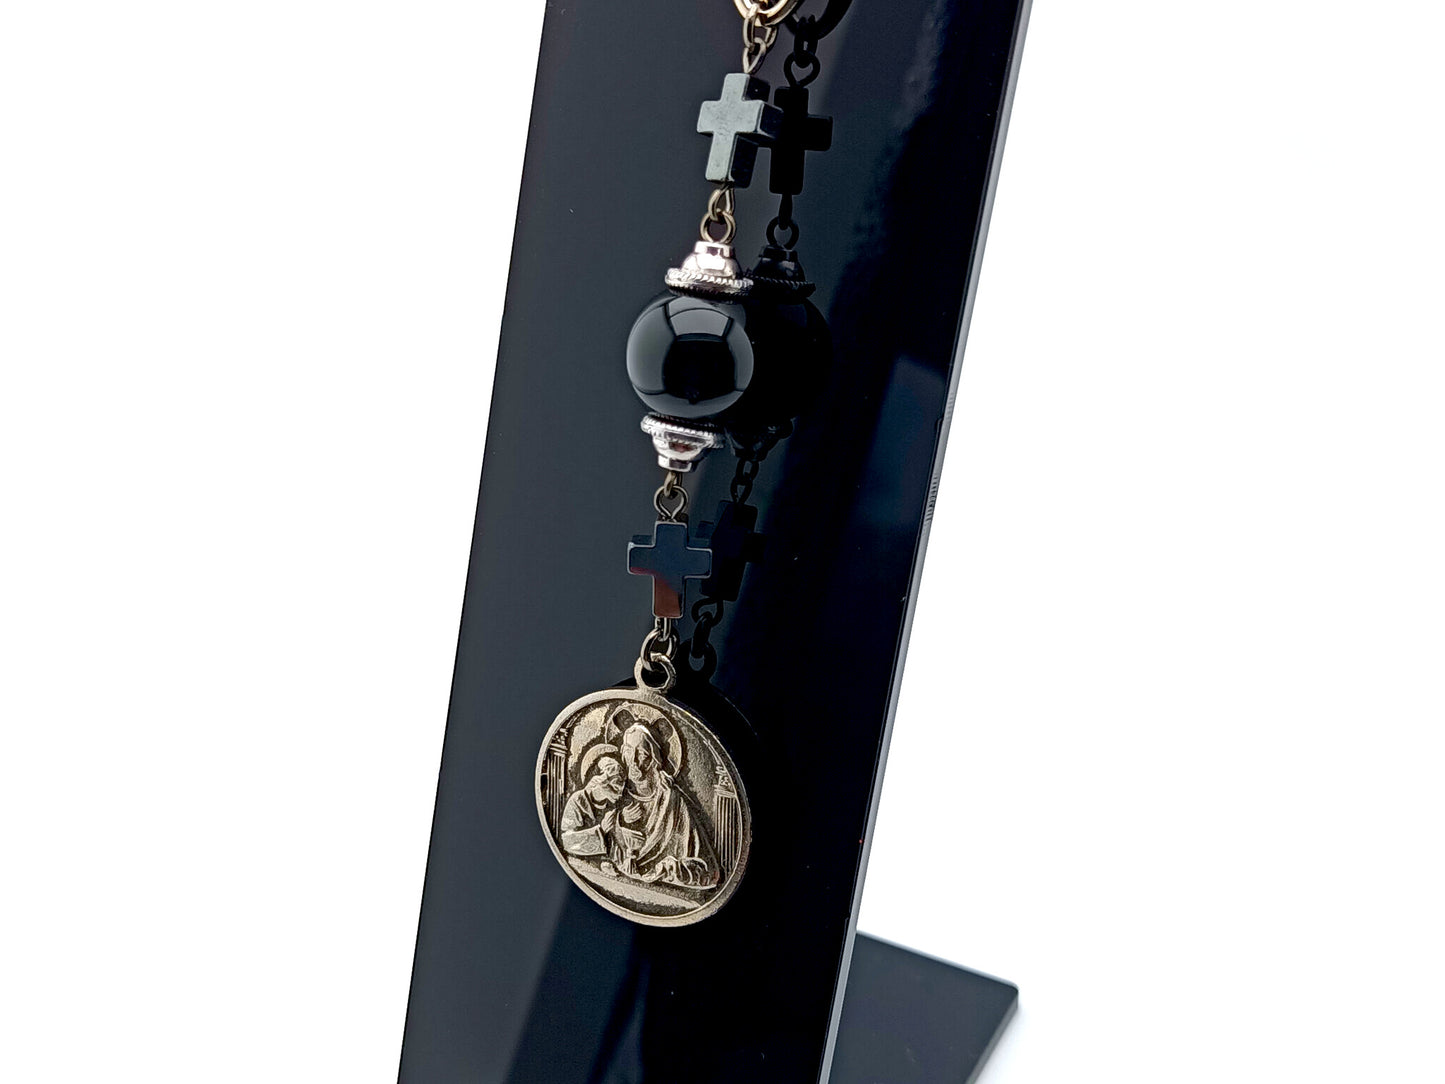 Blessed Sacrament unique rosary beads purse clip key chain with onyx and hematite cross beads, indulgence medal and loop ring.